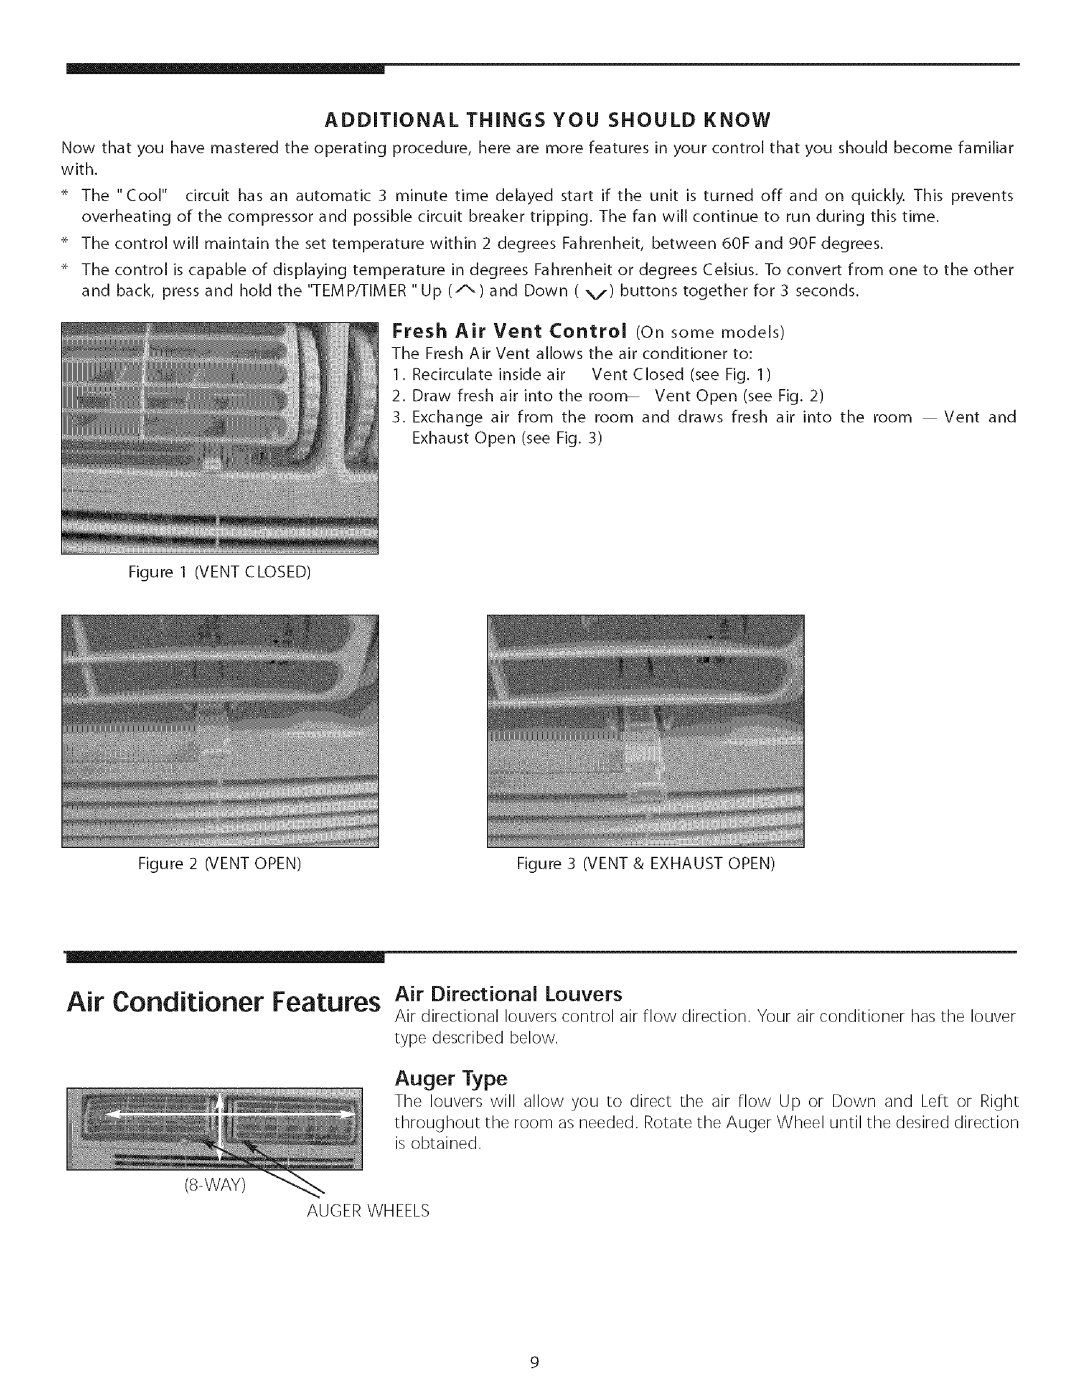 Kenmore owner manual Air Conditioner Features Air Directional Louvers, Auger Type 